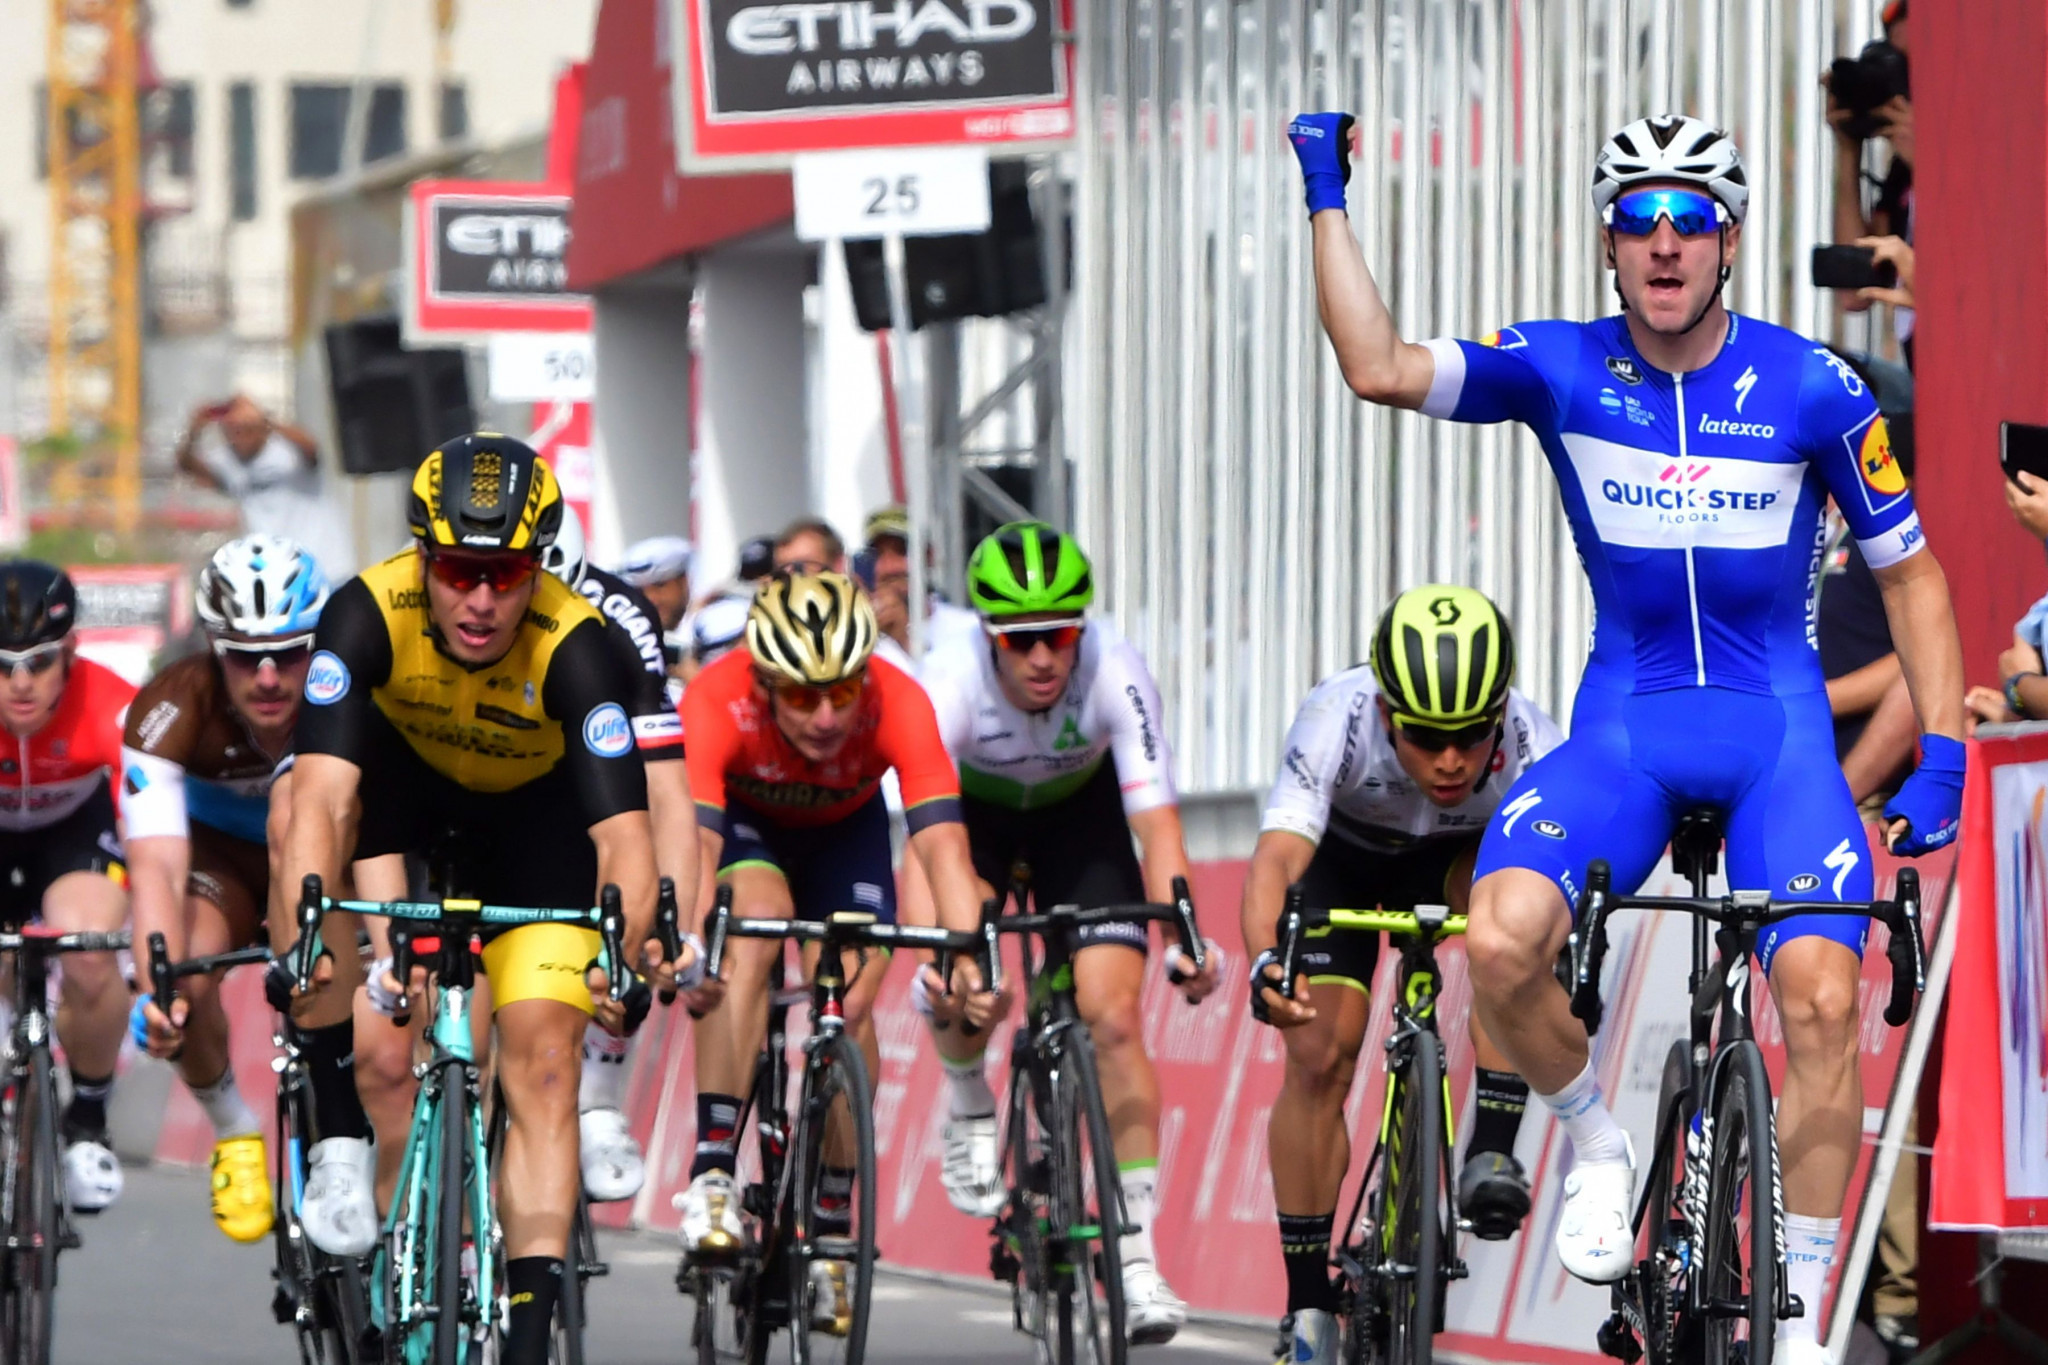 Elia Viviani earned an impressive sprint victory on stage two of the Abu Dhabi Tour ©Getty Images